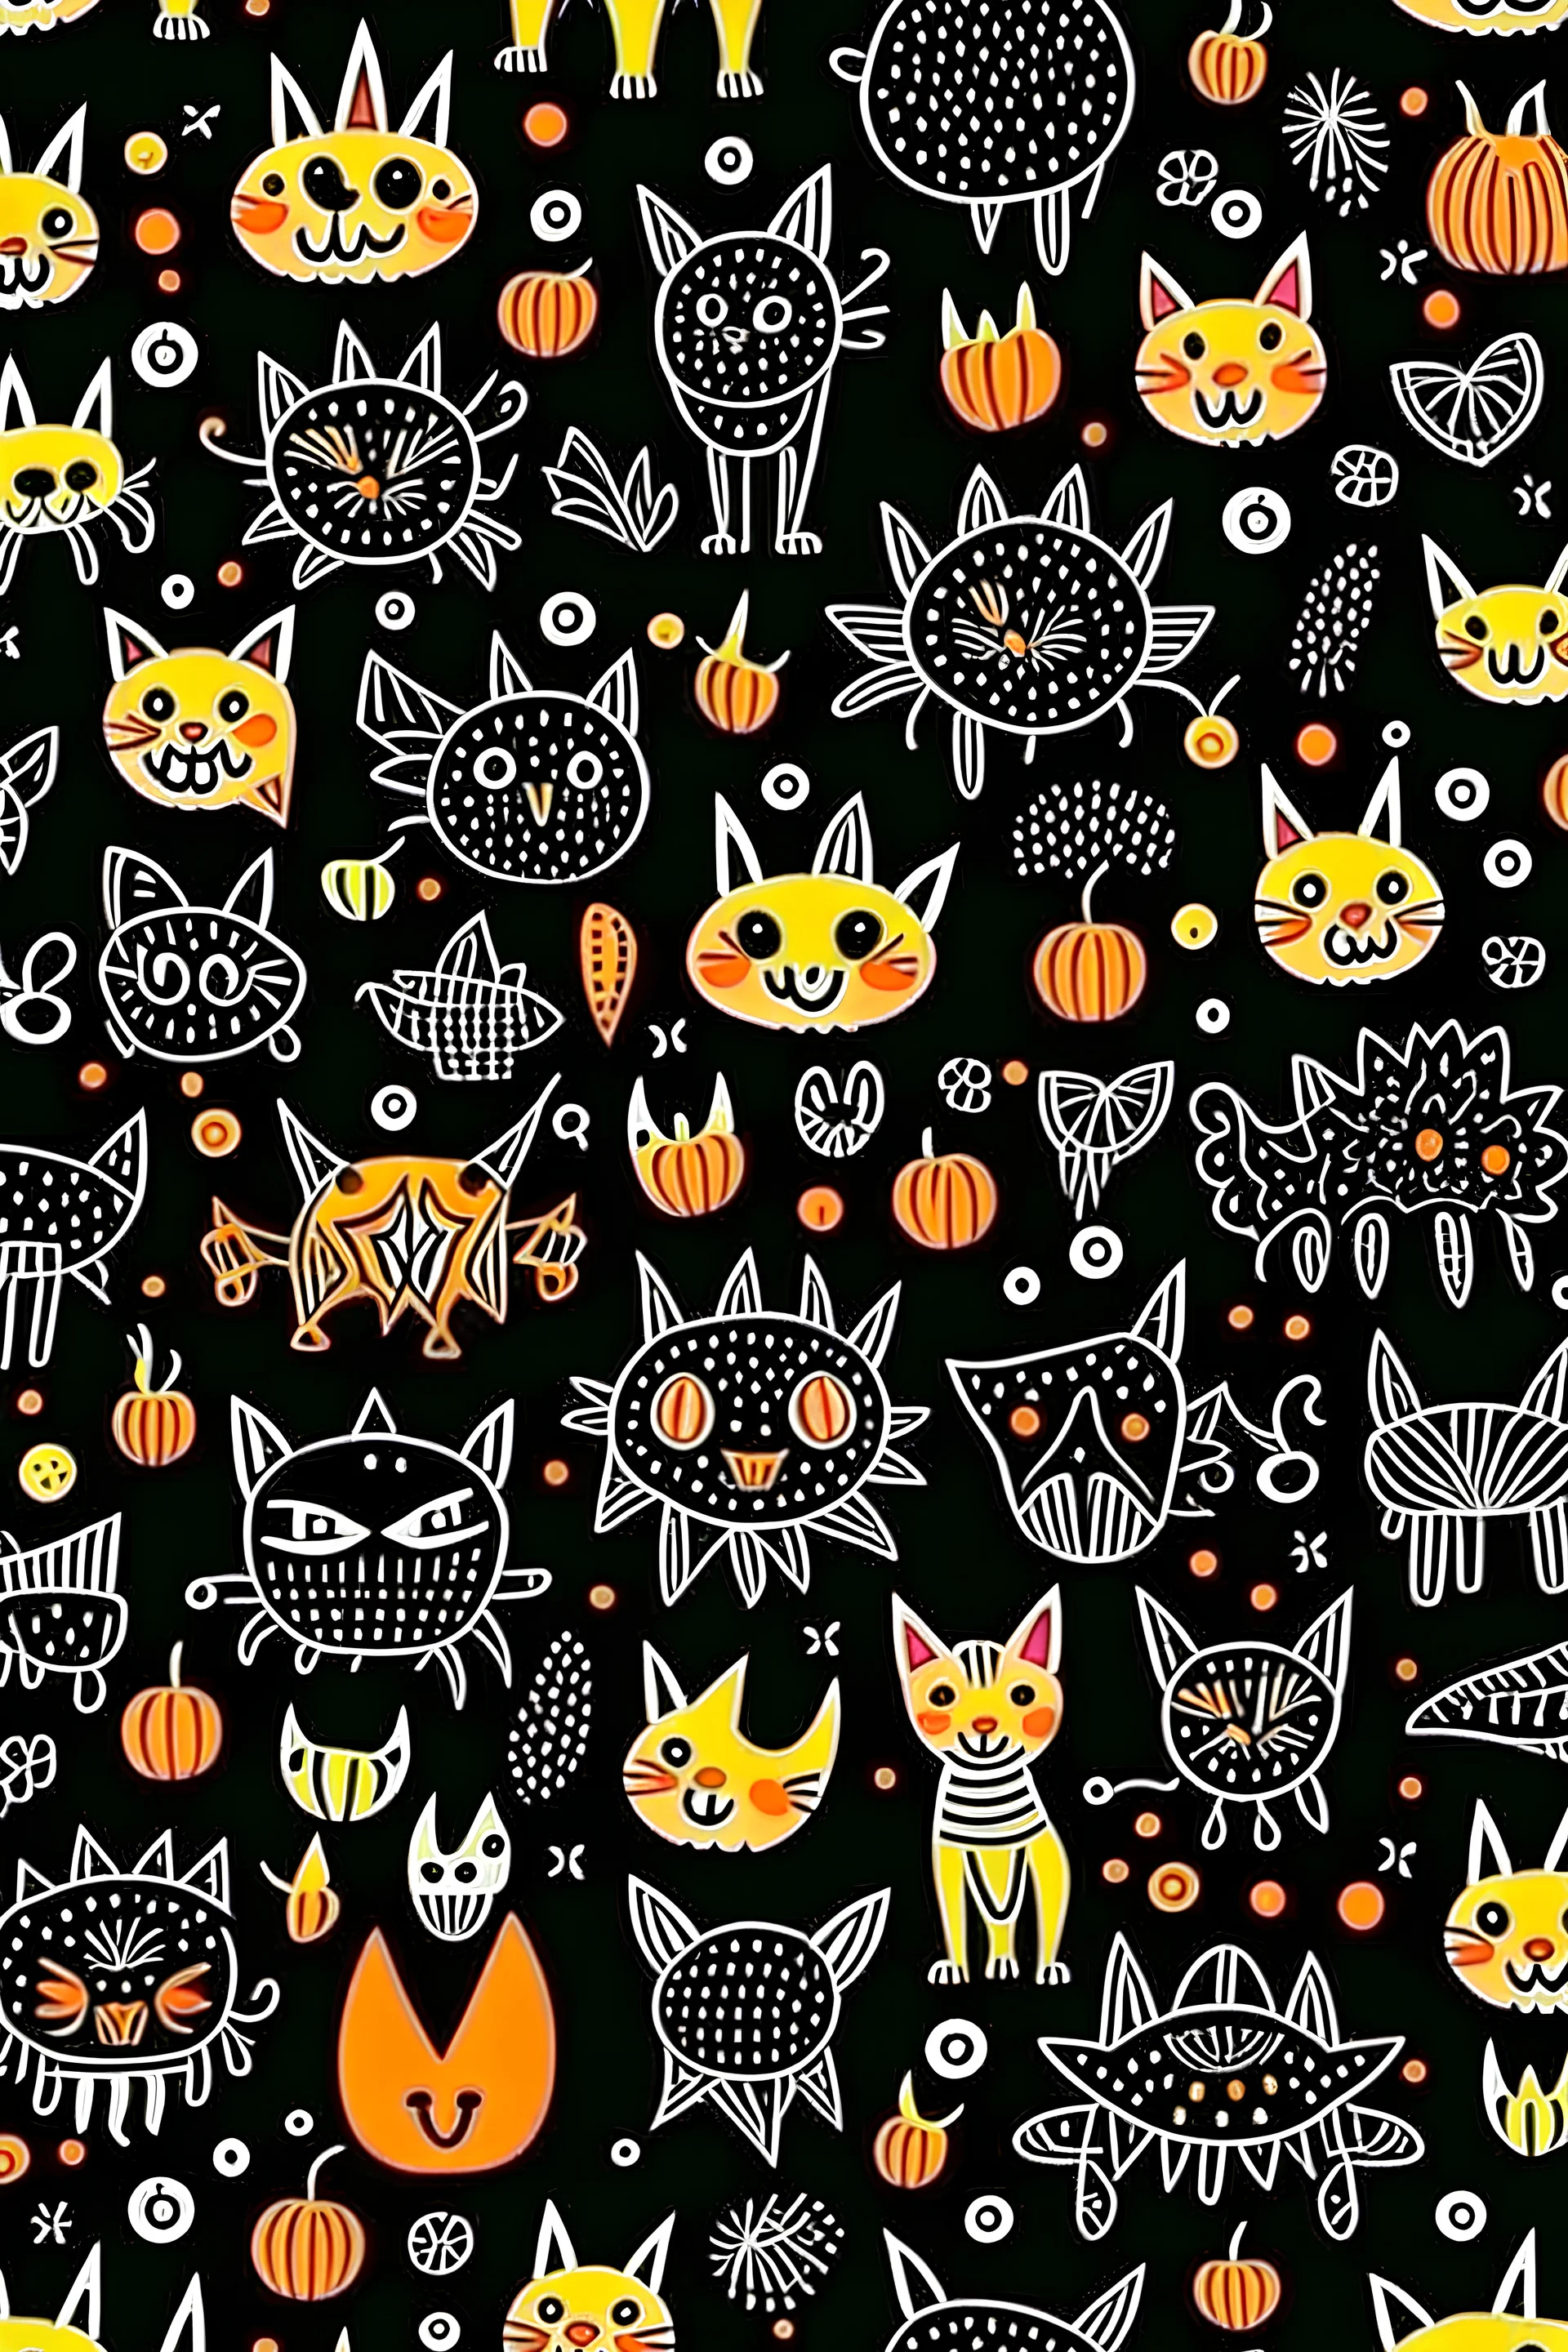 halloween pattern with black cats, bats, skeletons, and witches in a cartoon style